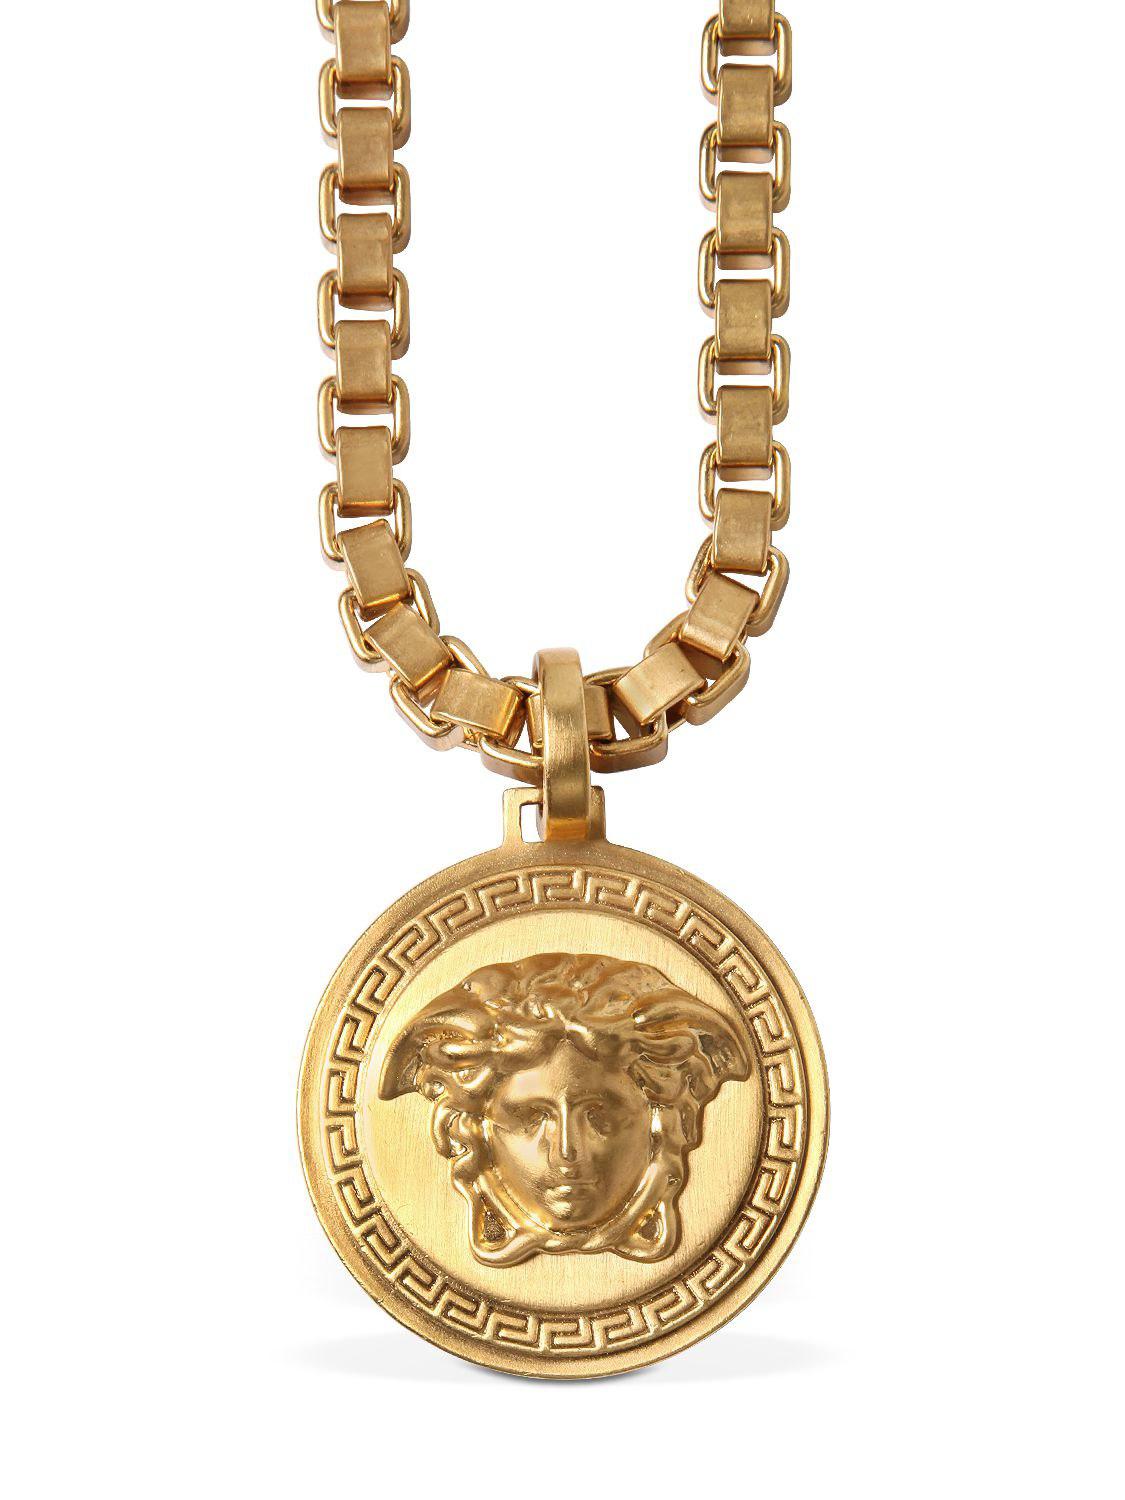 Versace Medusa Coin Necklace in Gold (Metallic) for Men - Lyst